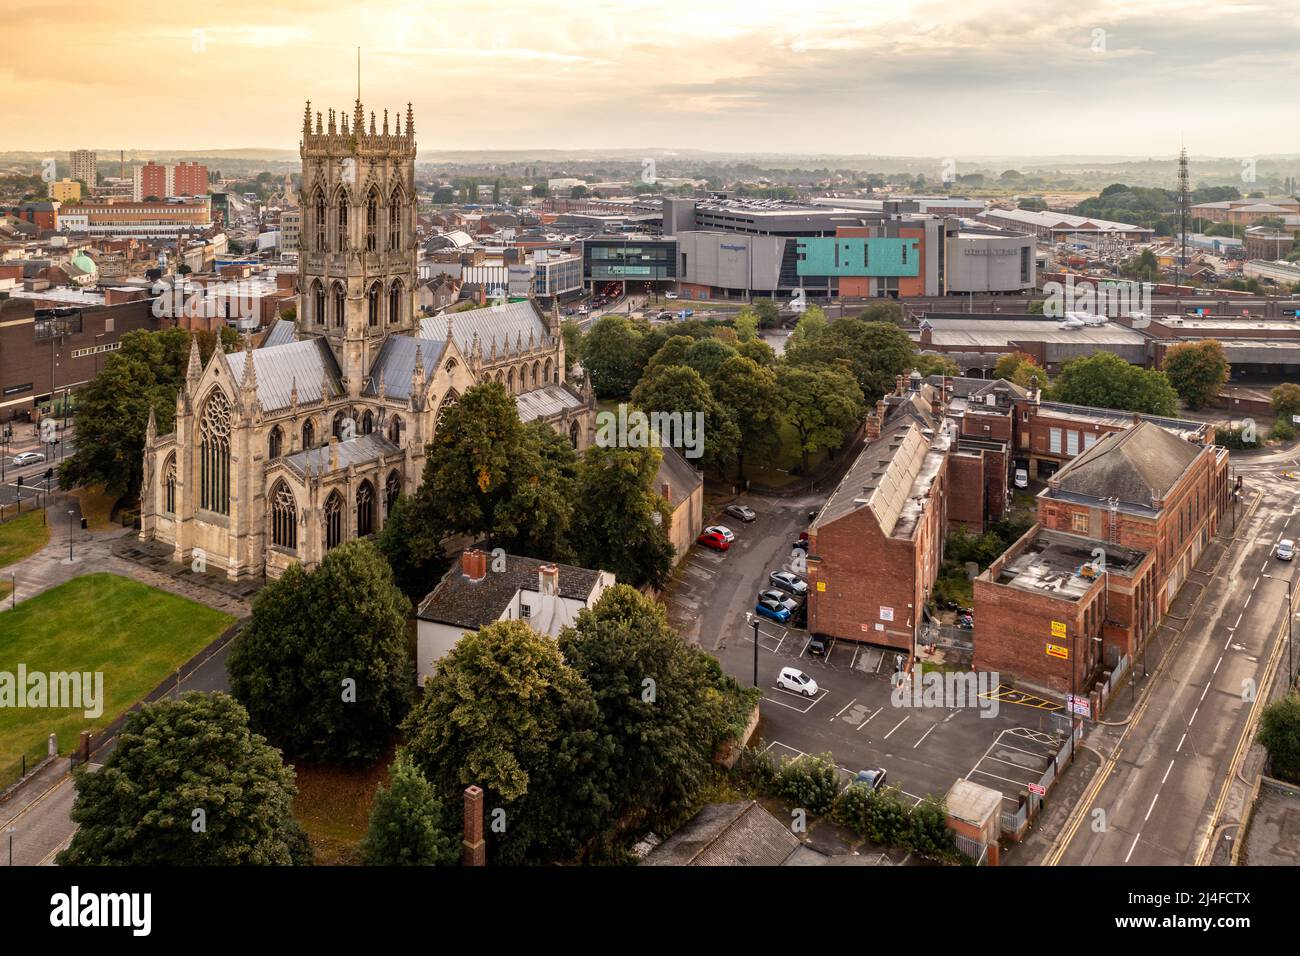 An aerial cityscape of Doncaster town centre with The Minster church of St George and Frenchgate shopping mall Stock Photo